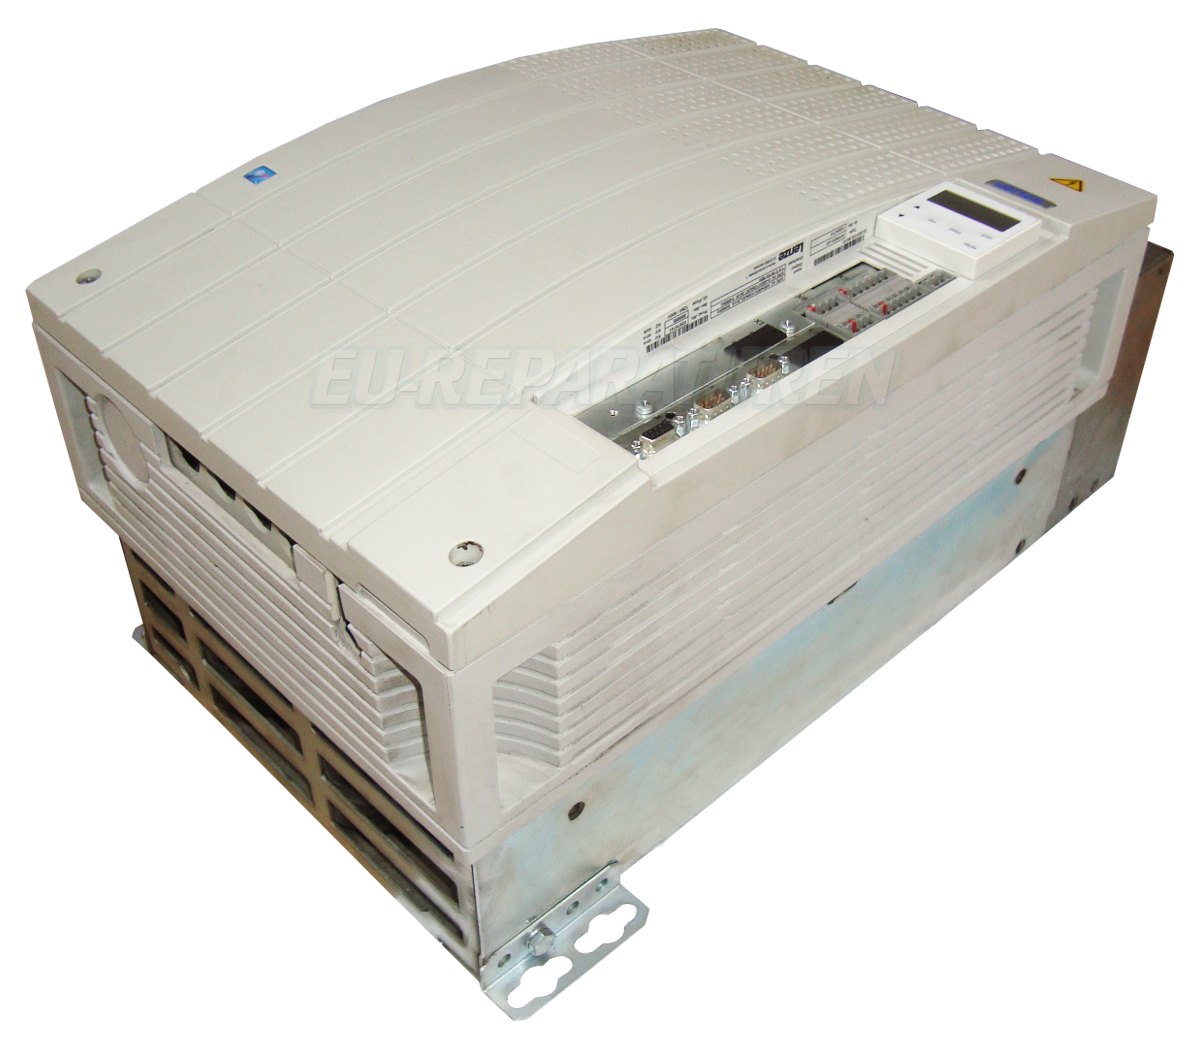 3 Quick Repair Service Evf9331-ev Frequency Inverter